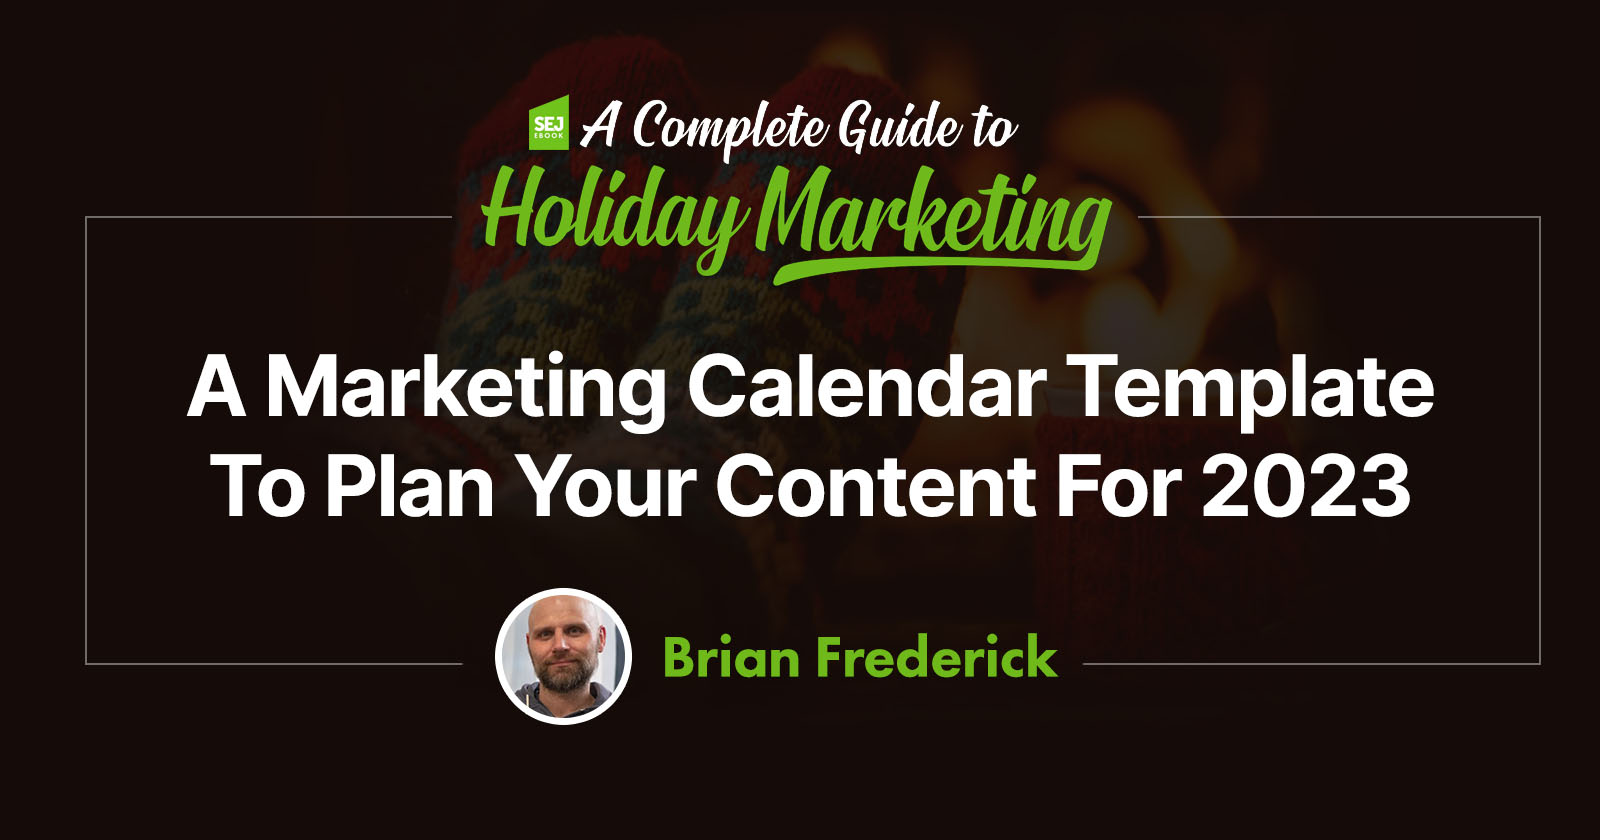 A Marketing Calendar Template To Plan Your Content For 2023